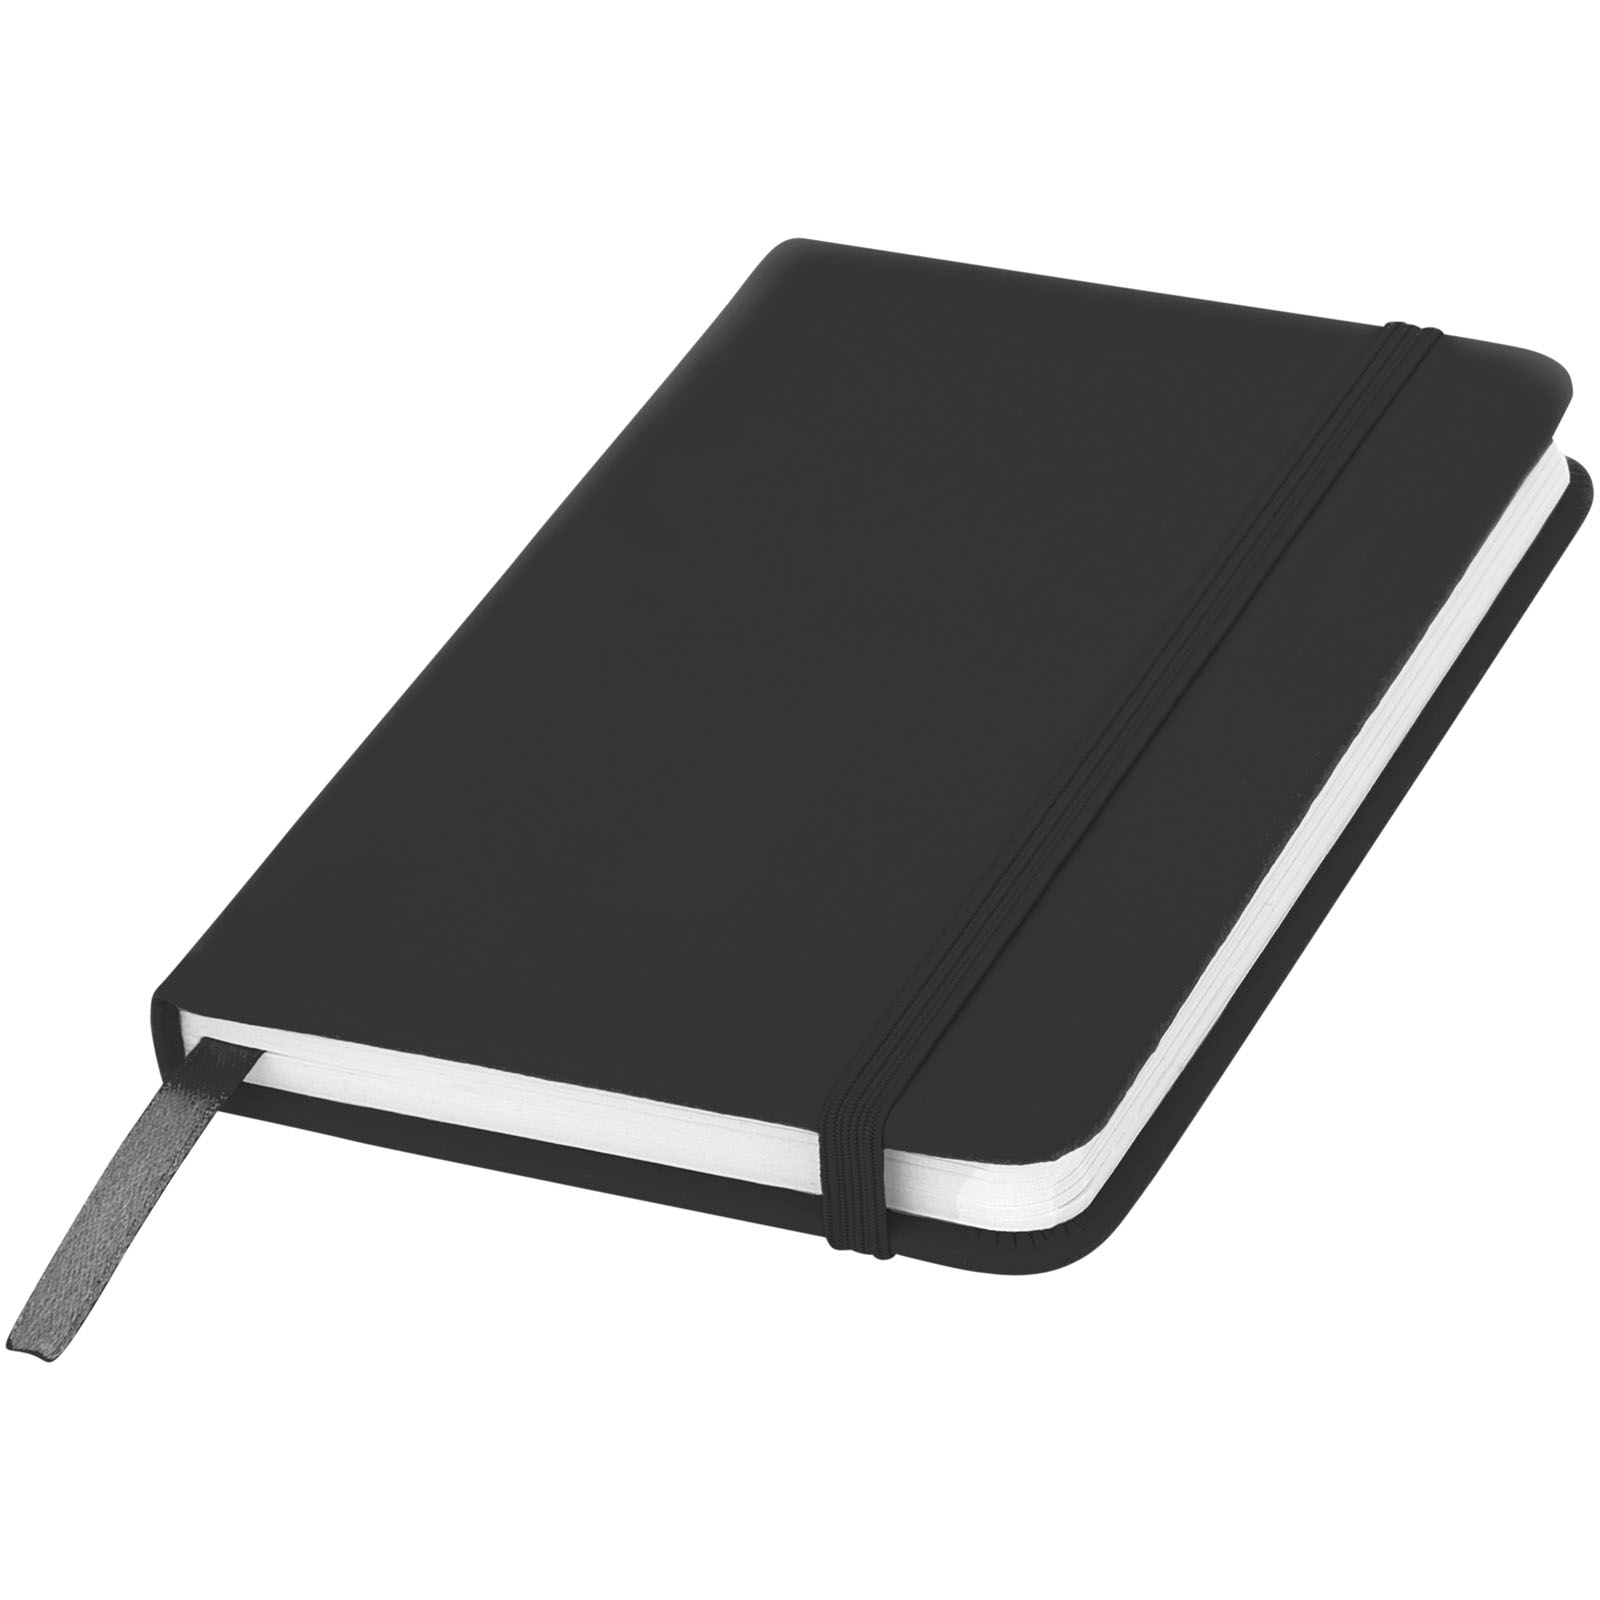 Advertising Hard cover notebooks - Spectrum A6 hard cover notebook - 0